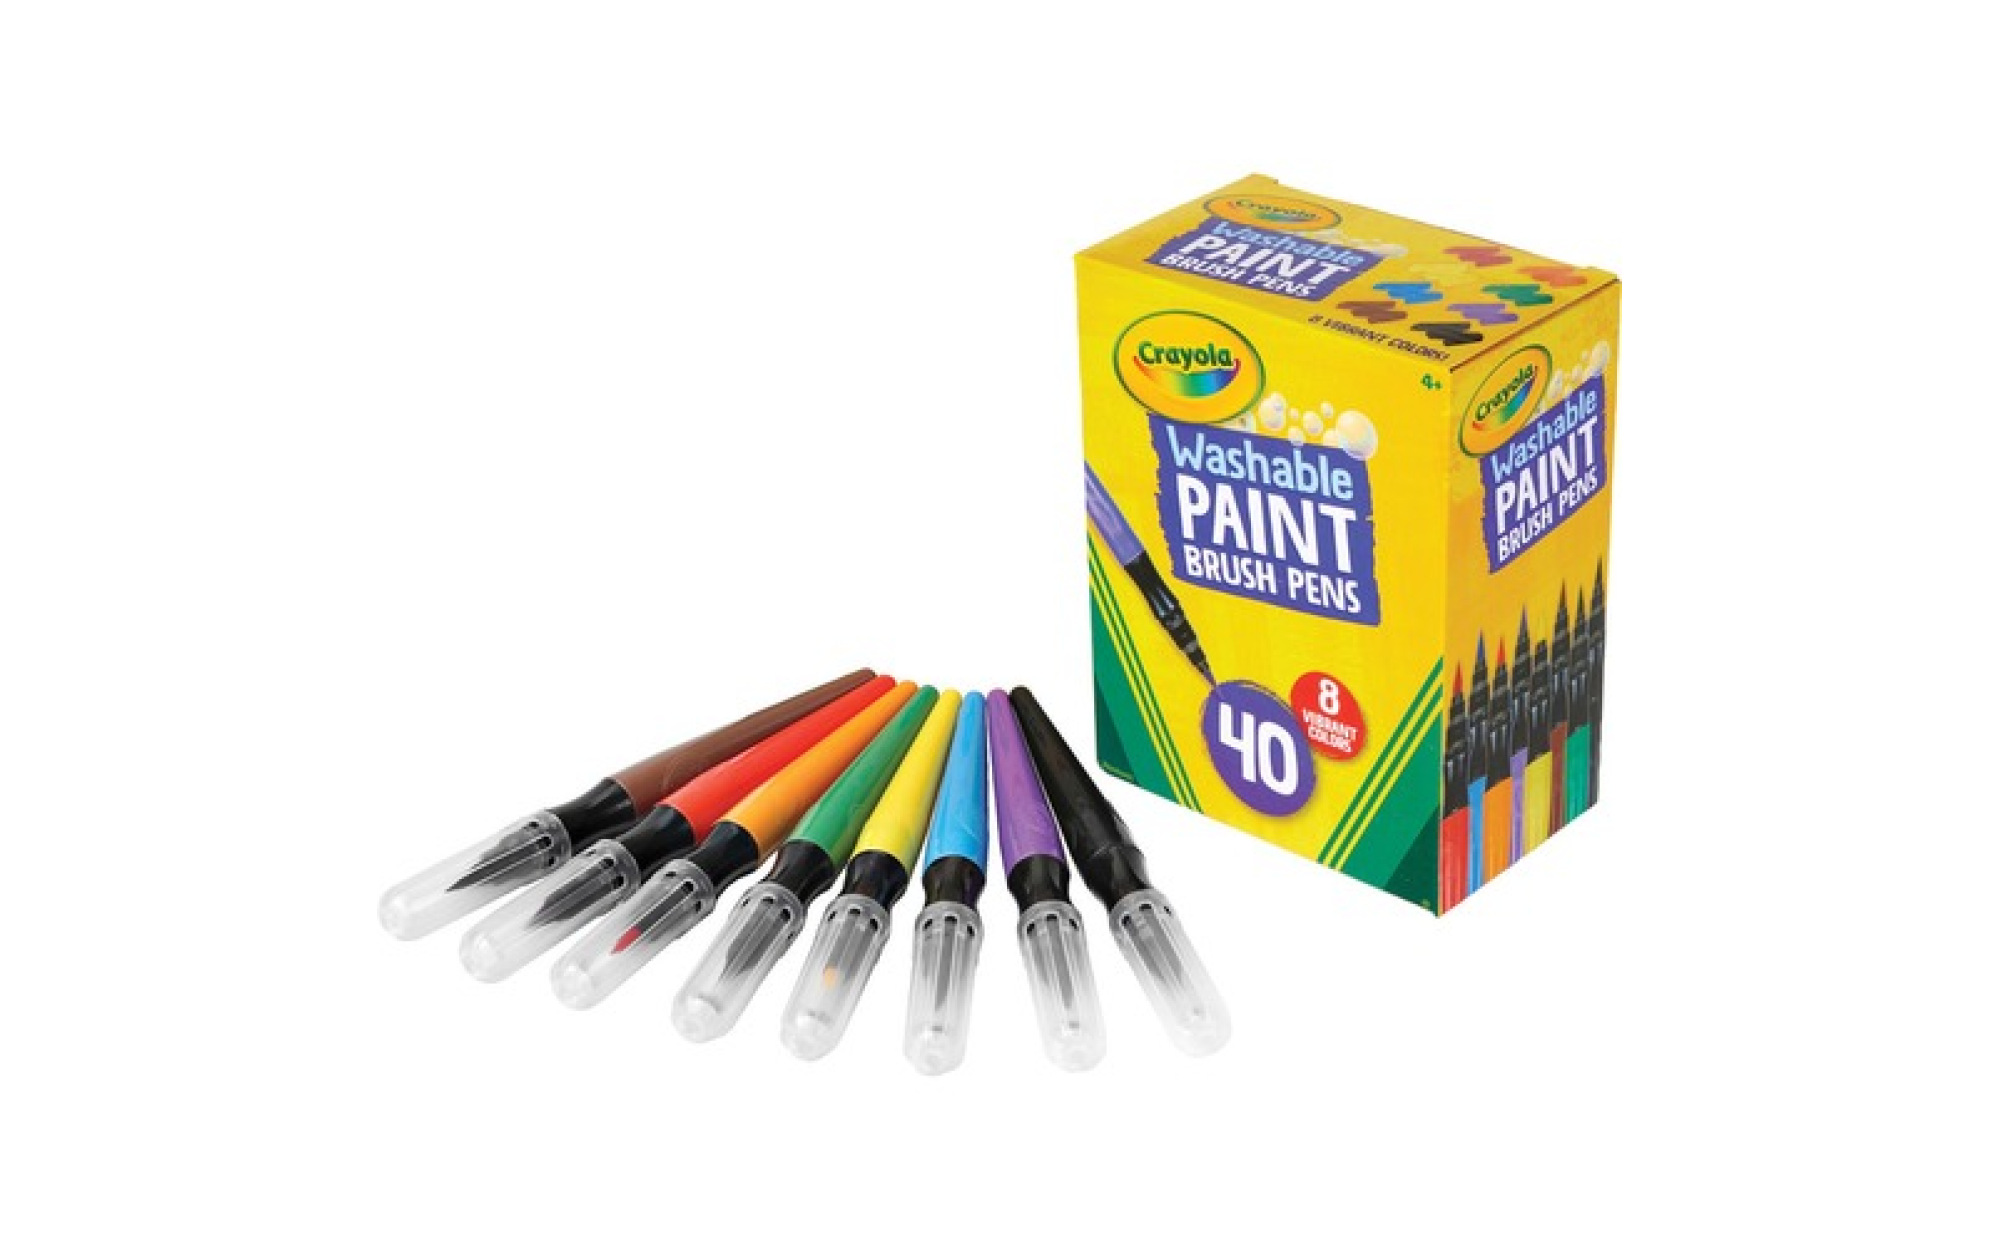 Crayola 5 washable paint brush pens reviews in Paint & Art